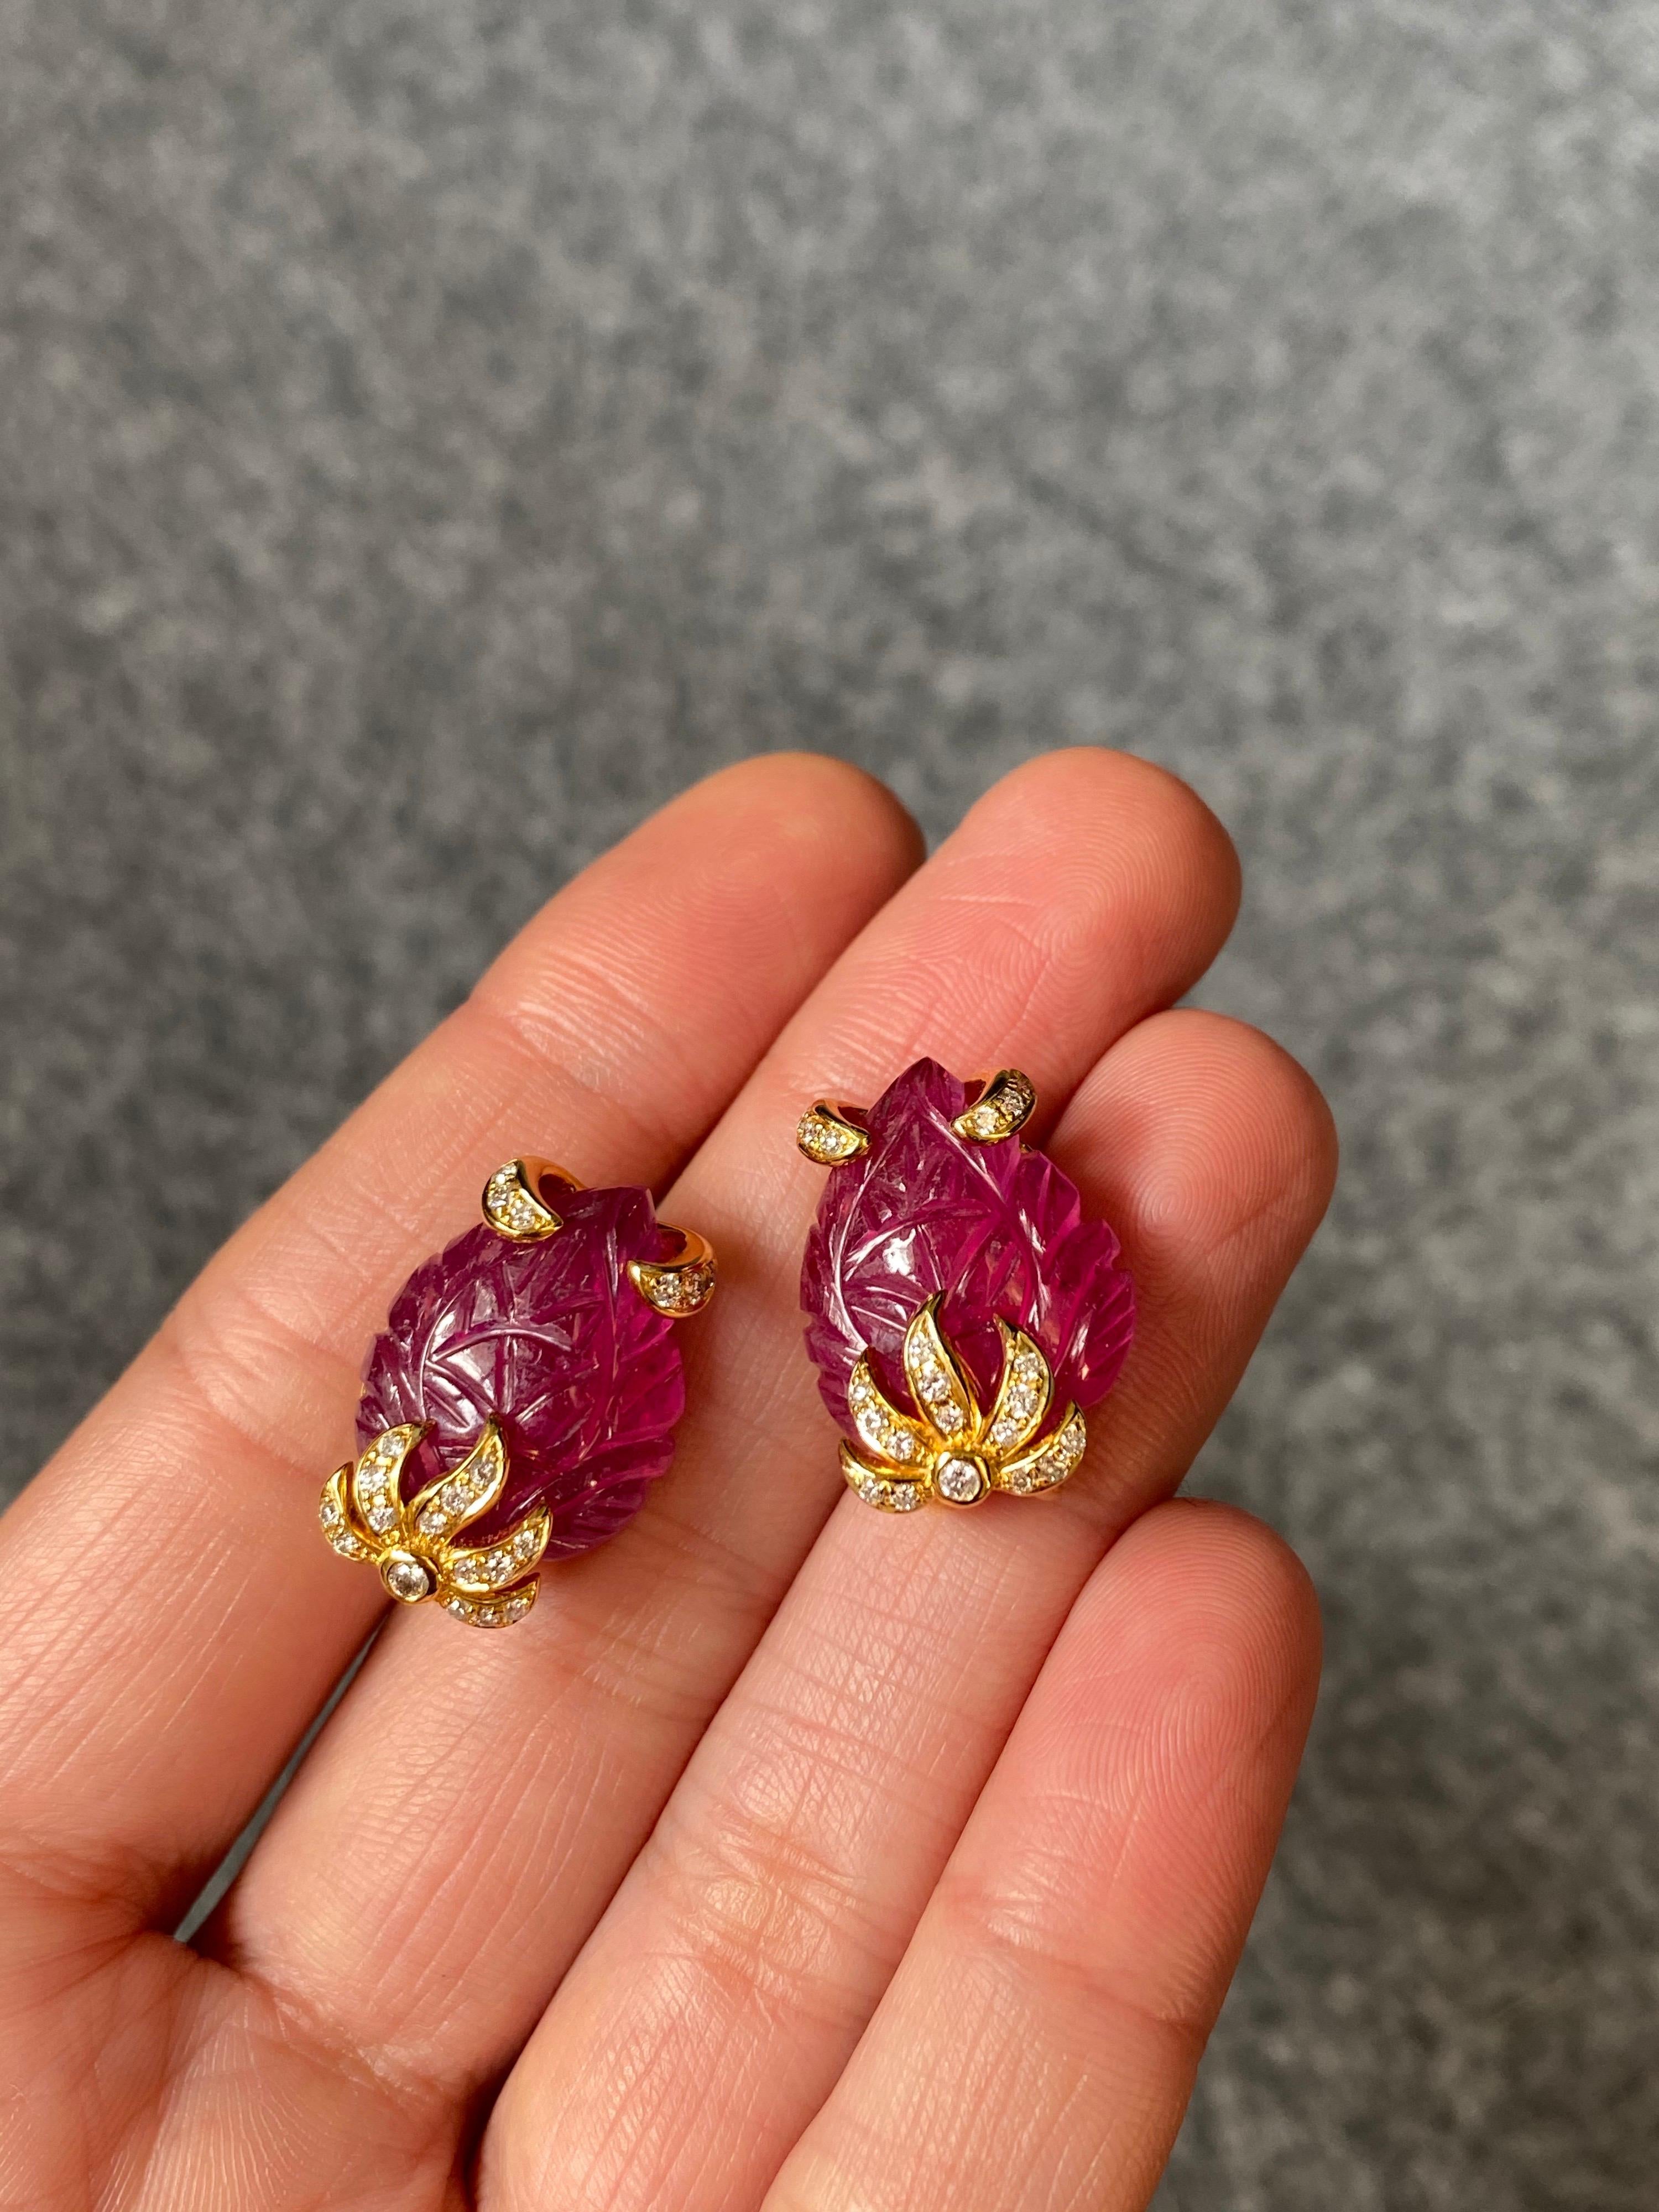 A pair of beautifully carved 21.14 carat Rubies with 0.3 carat Diamonds, set in solid 18K Yellow Gold. The intricately carved rubies make the earrings very unique, giving them an art-deco look. 
The earrings come with a push-pull backing. 
Free